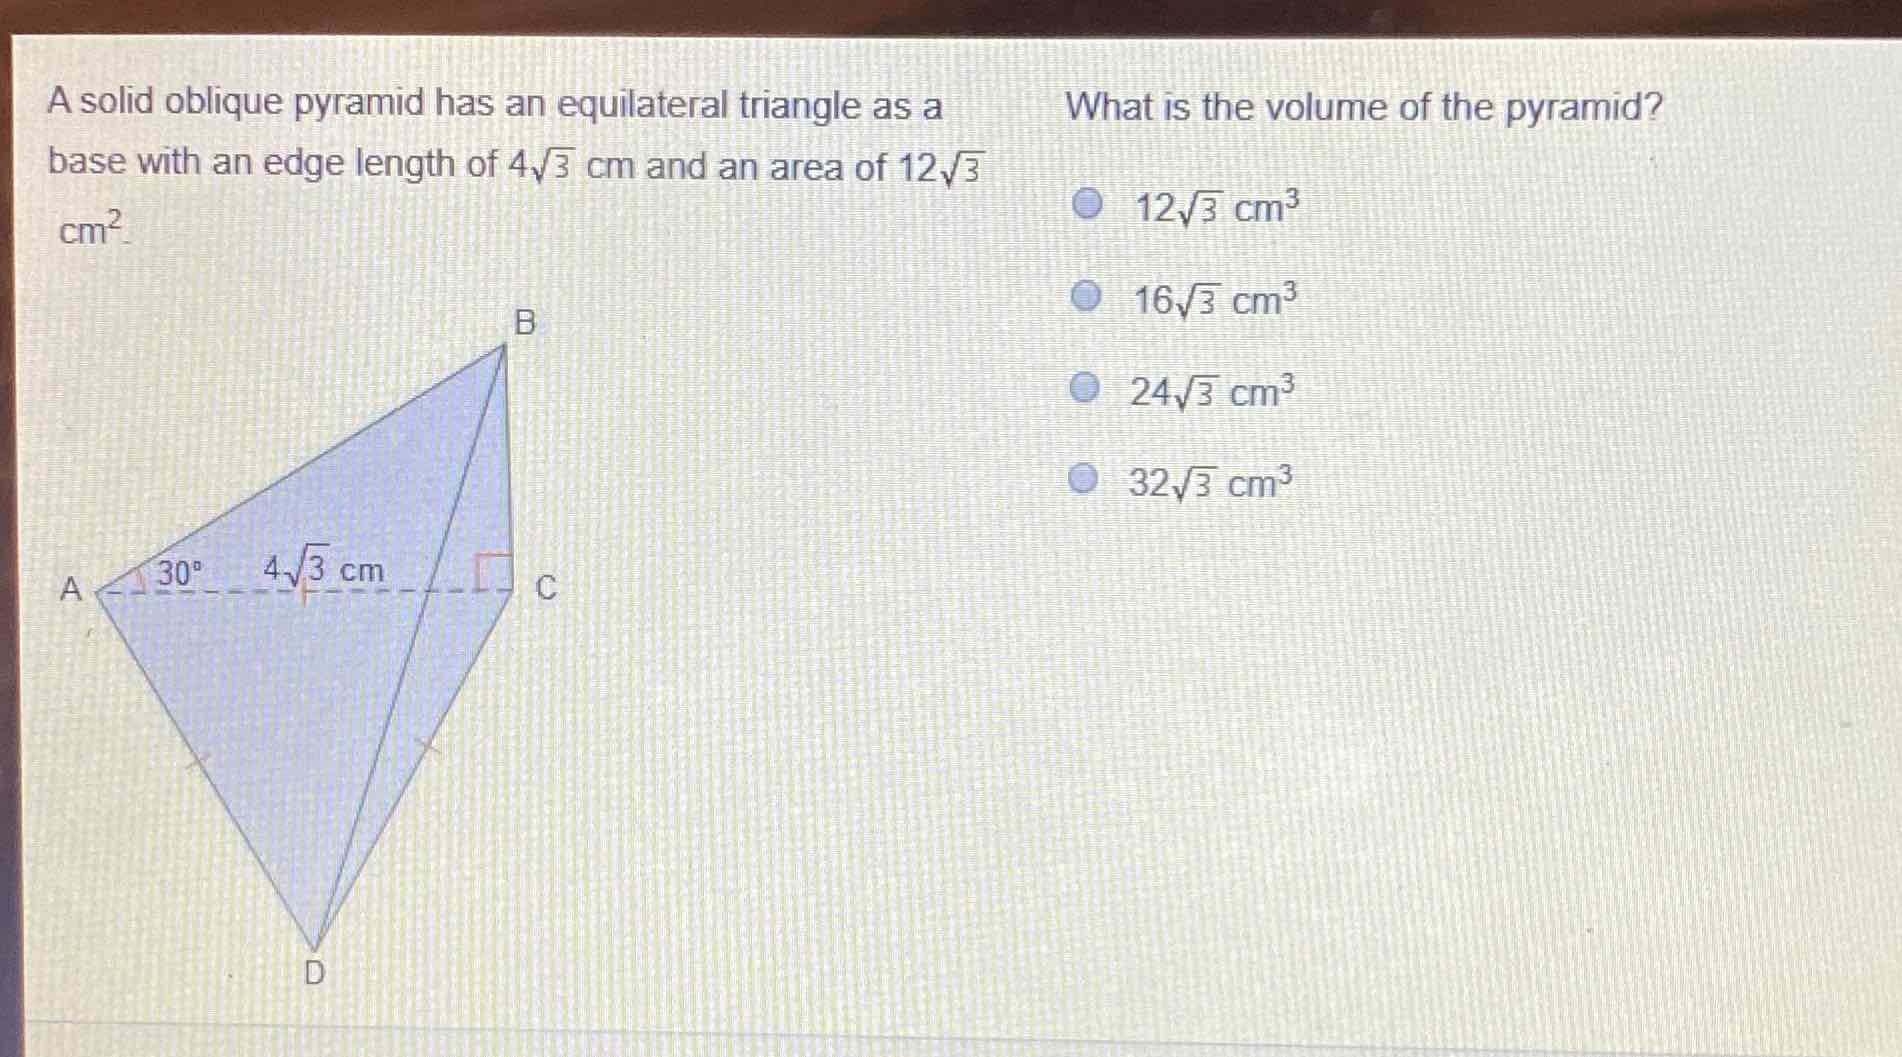 A solid oblique pyramid has an equilateral triangle as a
What is the volume of the pyramid? base with an edge length of \( 4 \sqrt{3} \mathrm{~cm} \) and an area of \( 12 \sqrt{3} \) \( \mathrm{cm}^{2} \)
\[
\begin{array}{l}
12 \sqrt{3} \mathrm{~cm}^{3} \\
16 \sqrt{3} \mathrm{~cm}^{3} \\
24 \sqrt{3} \mathrm{~cm}^{3} \\
32 \sqrt{3} \mathrm{~cm}^{3}
\end{array}
\]